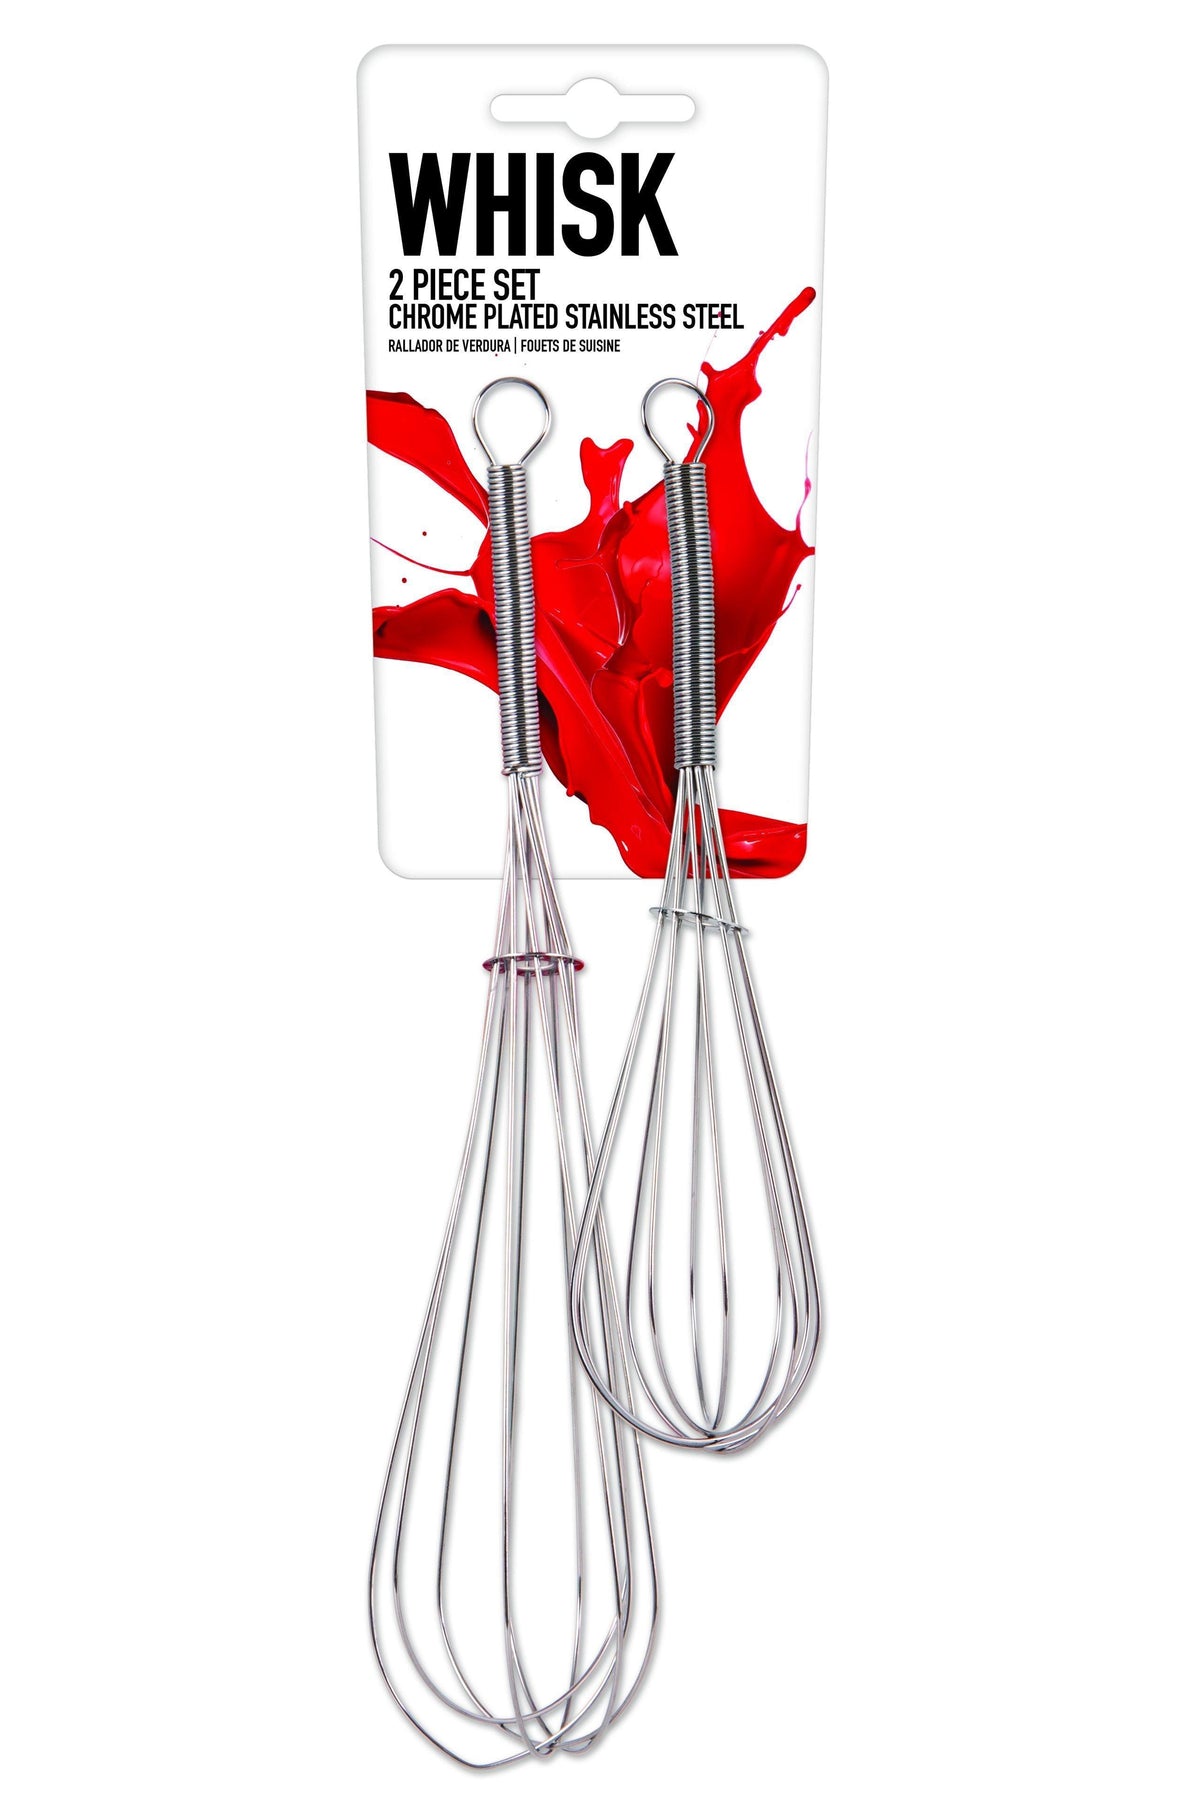 Chrome Plated Stainless Steel Whisks | 2 Piece Set - Choice Stores